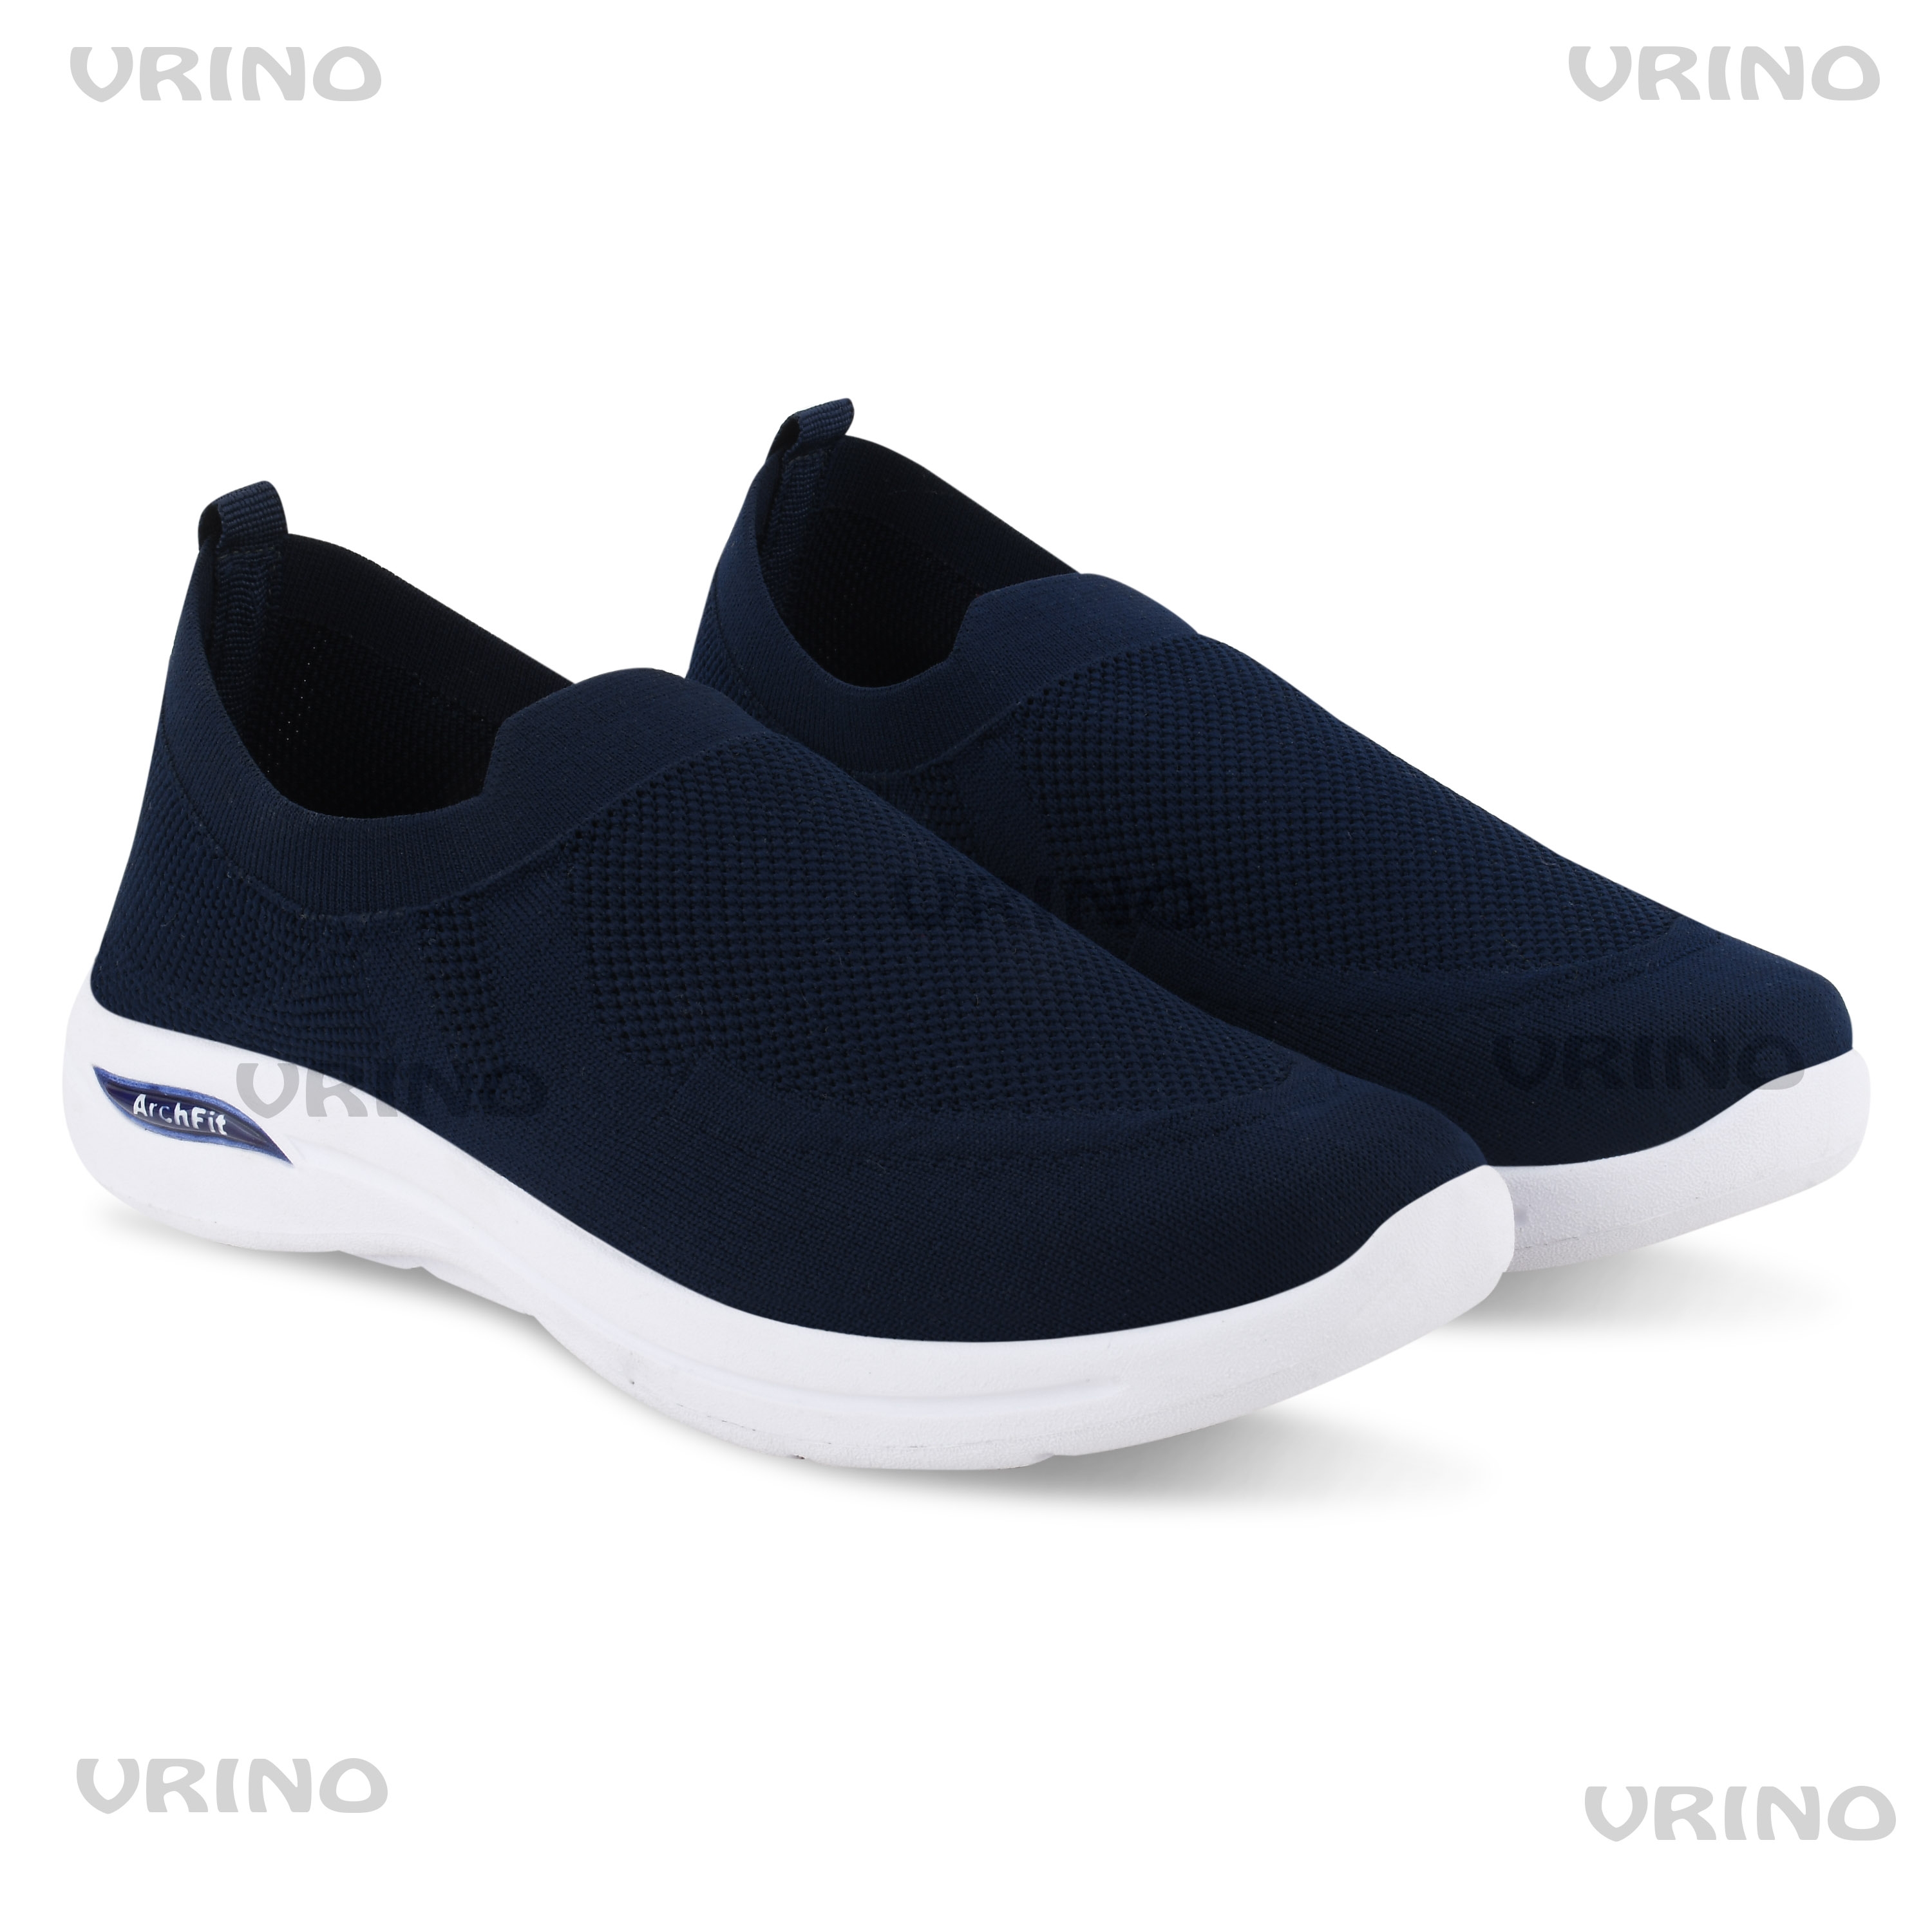 Men's Navy Knit Casual Slip-on Shoes